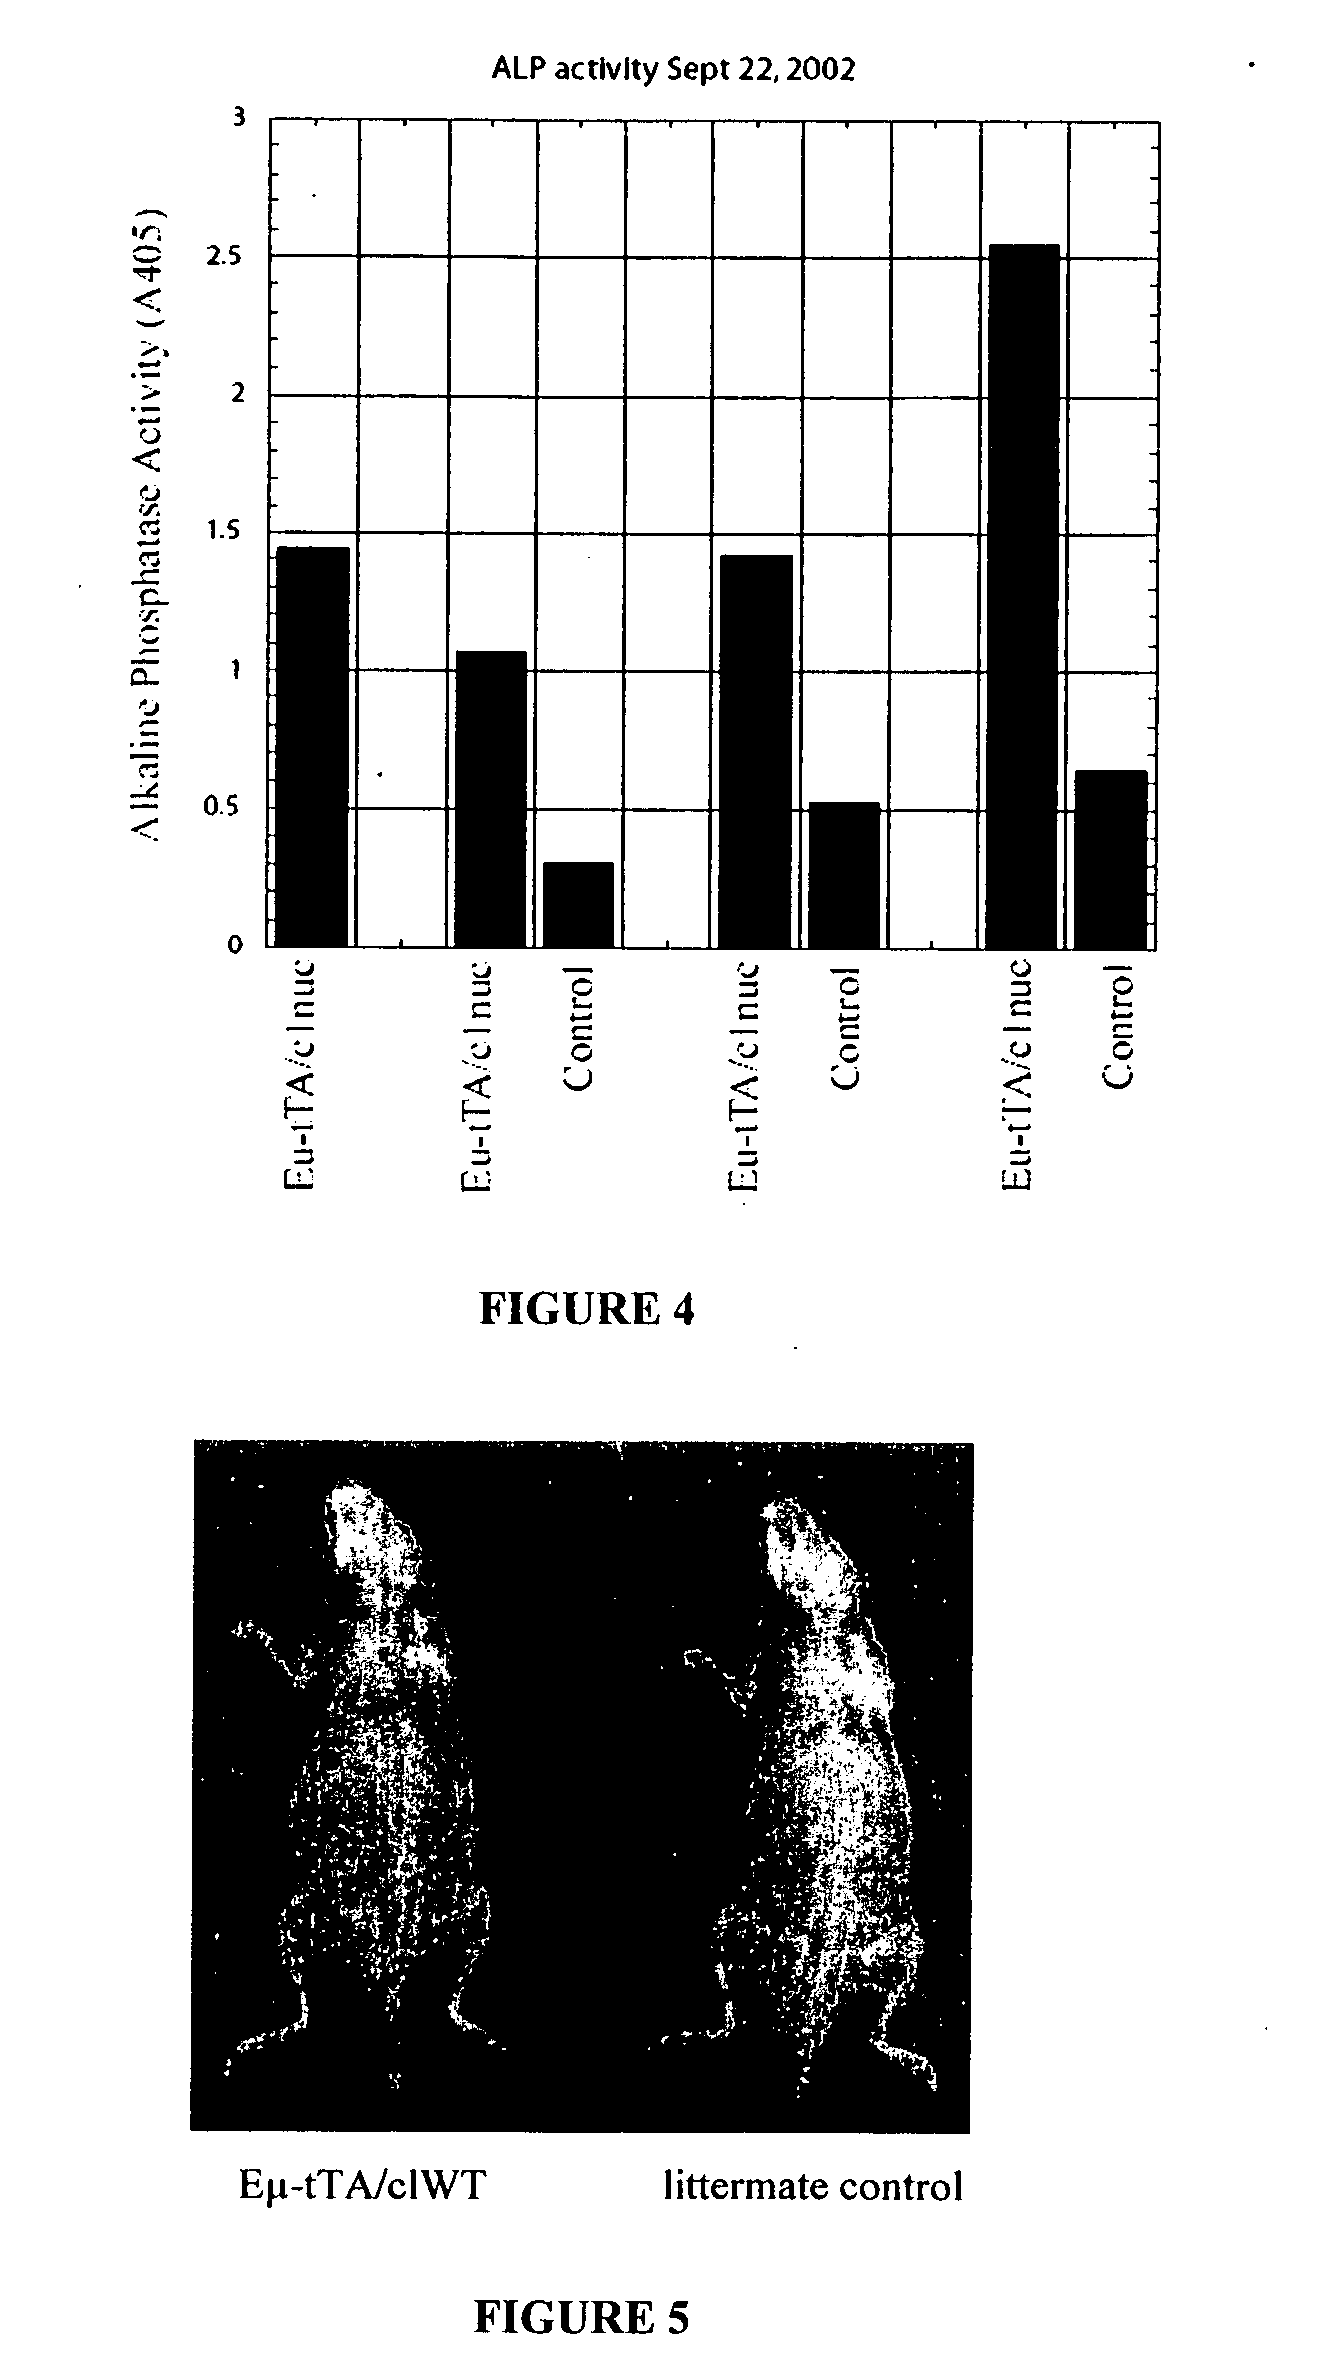 Methods and agents for enhancing bone formation or preventing bone loss